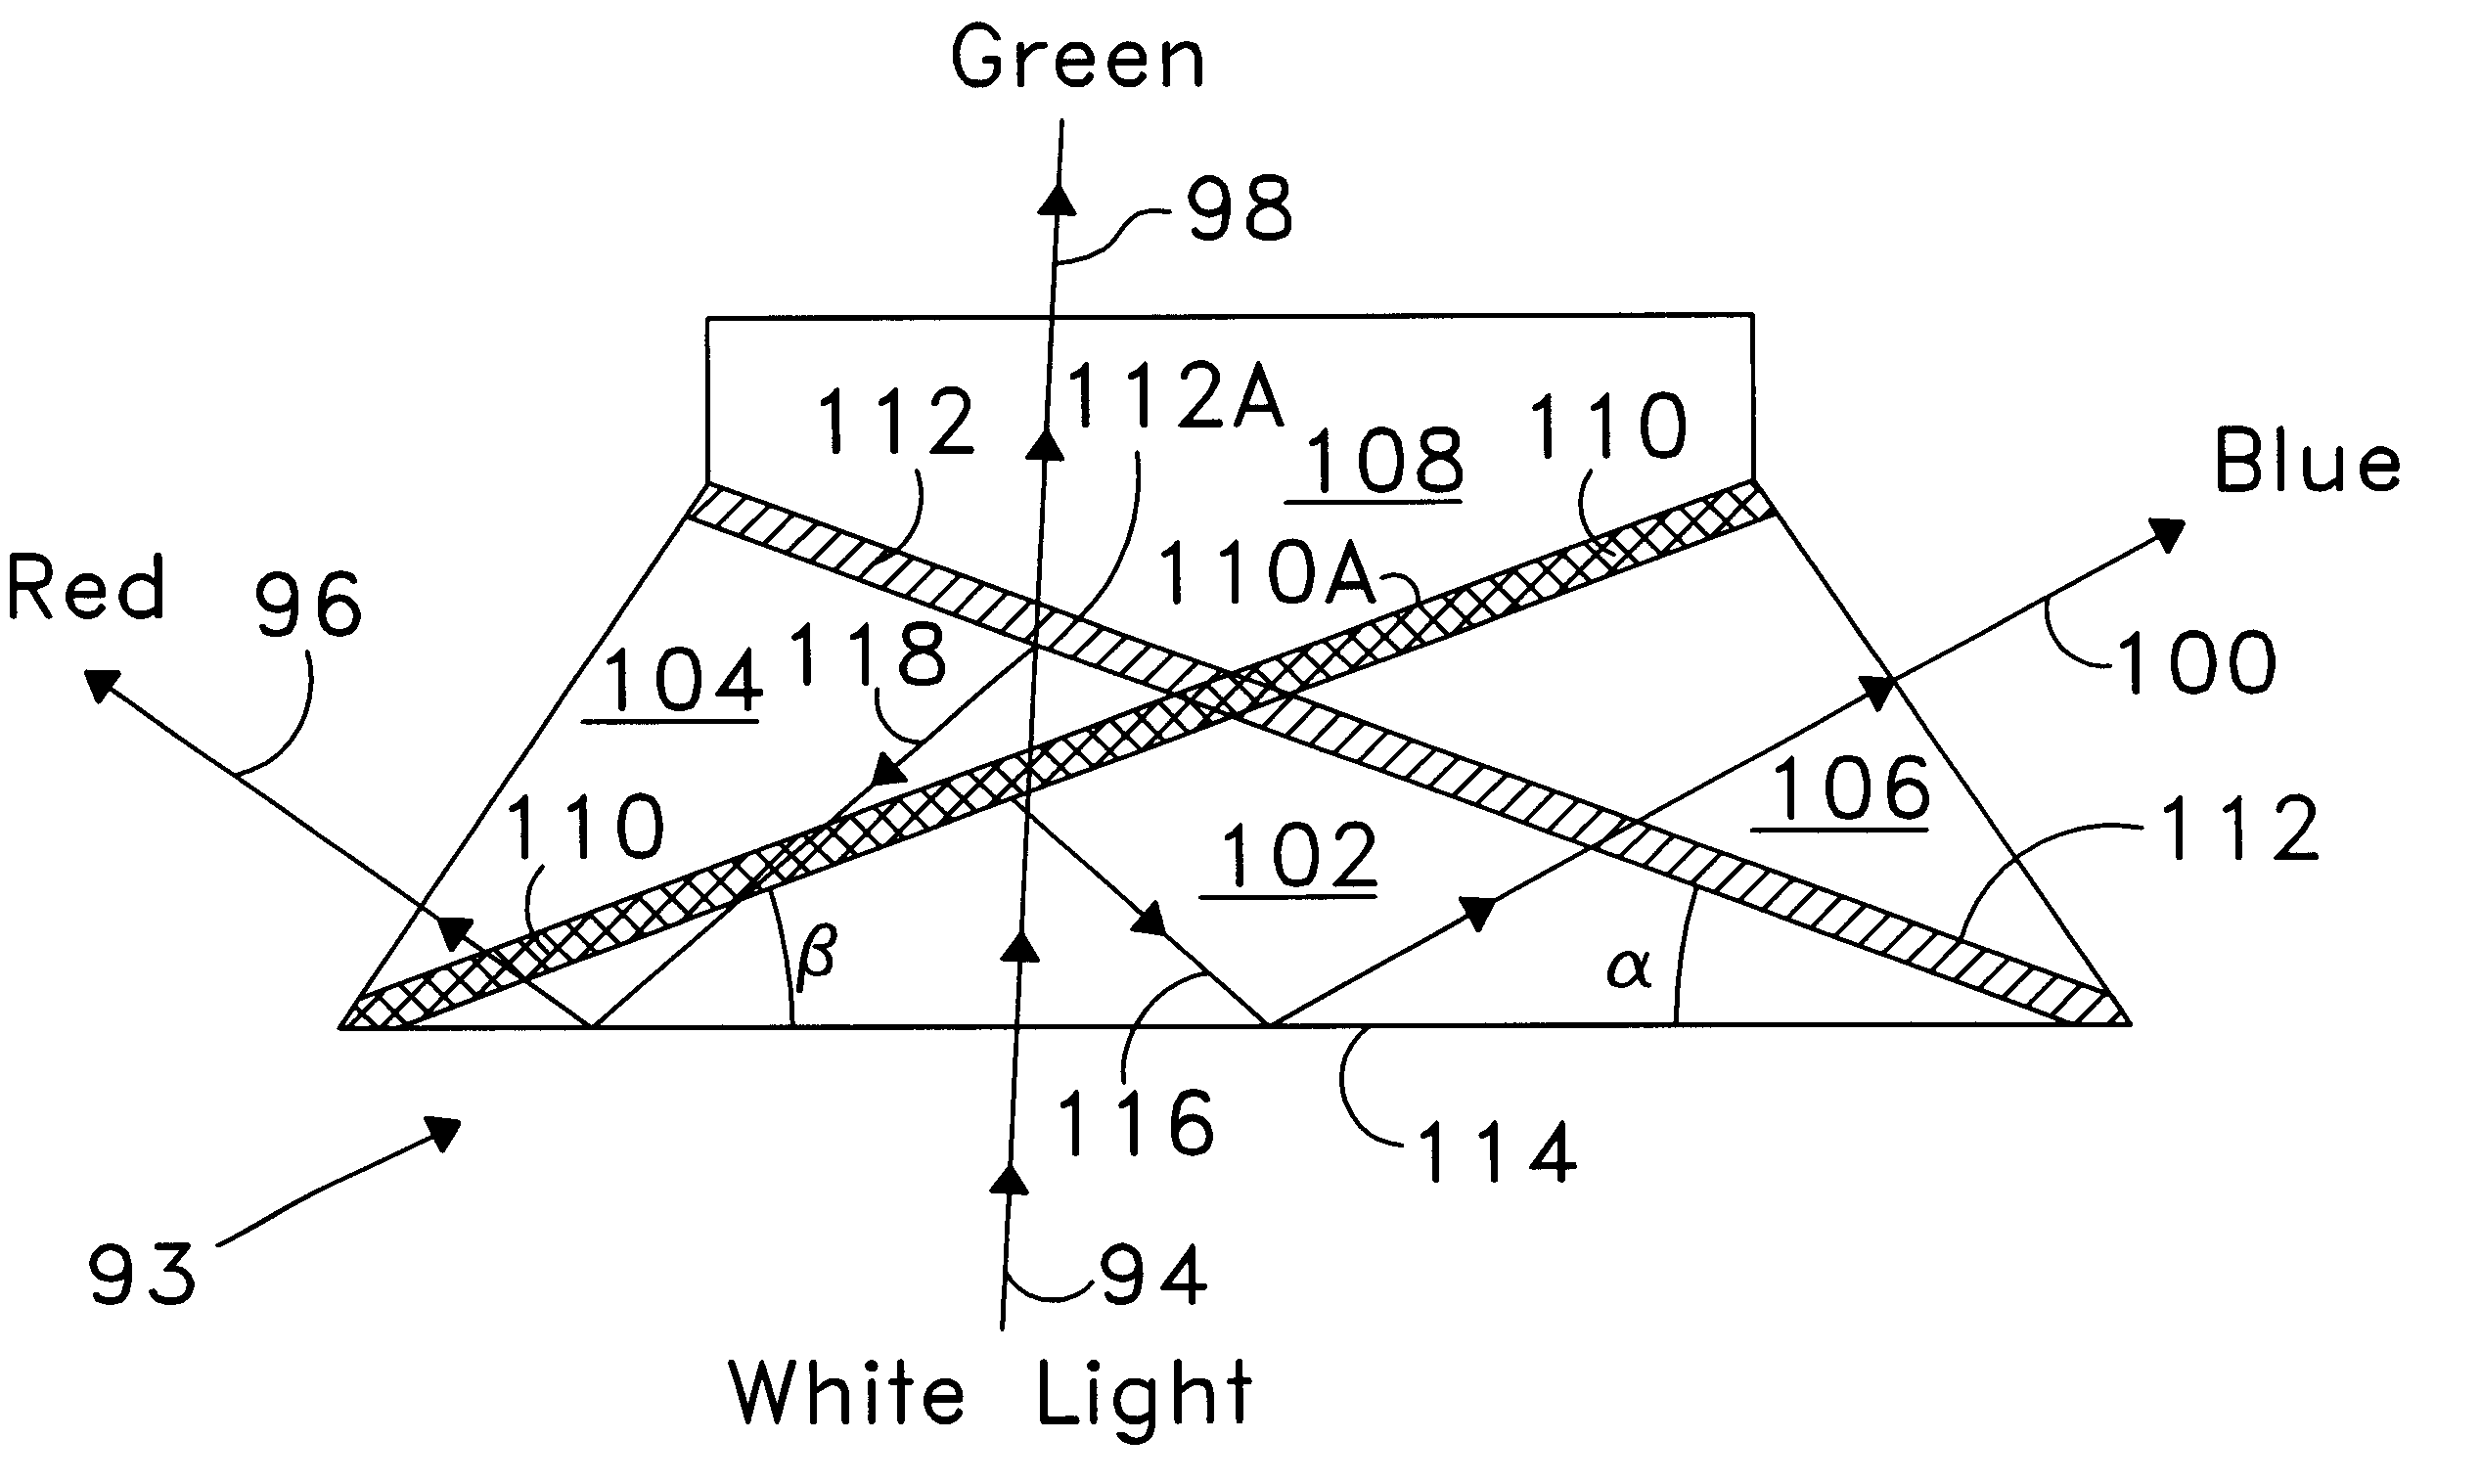 Producing colored light beams from white light